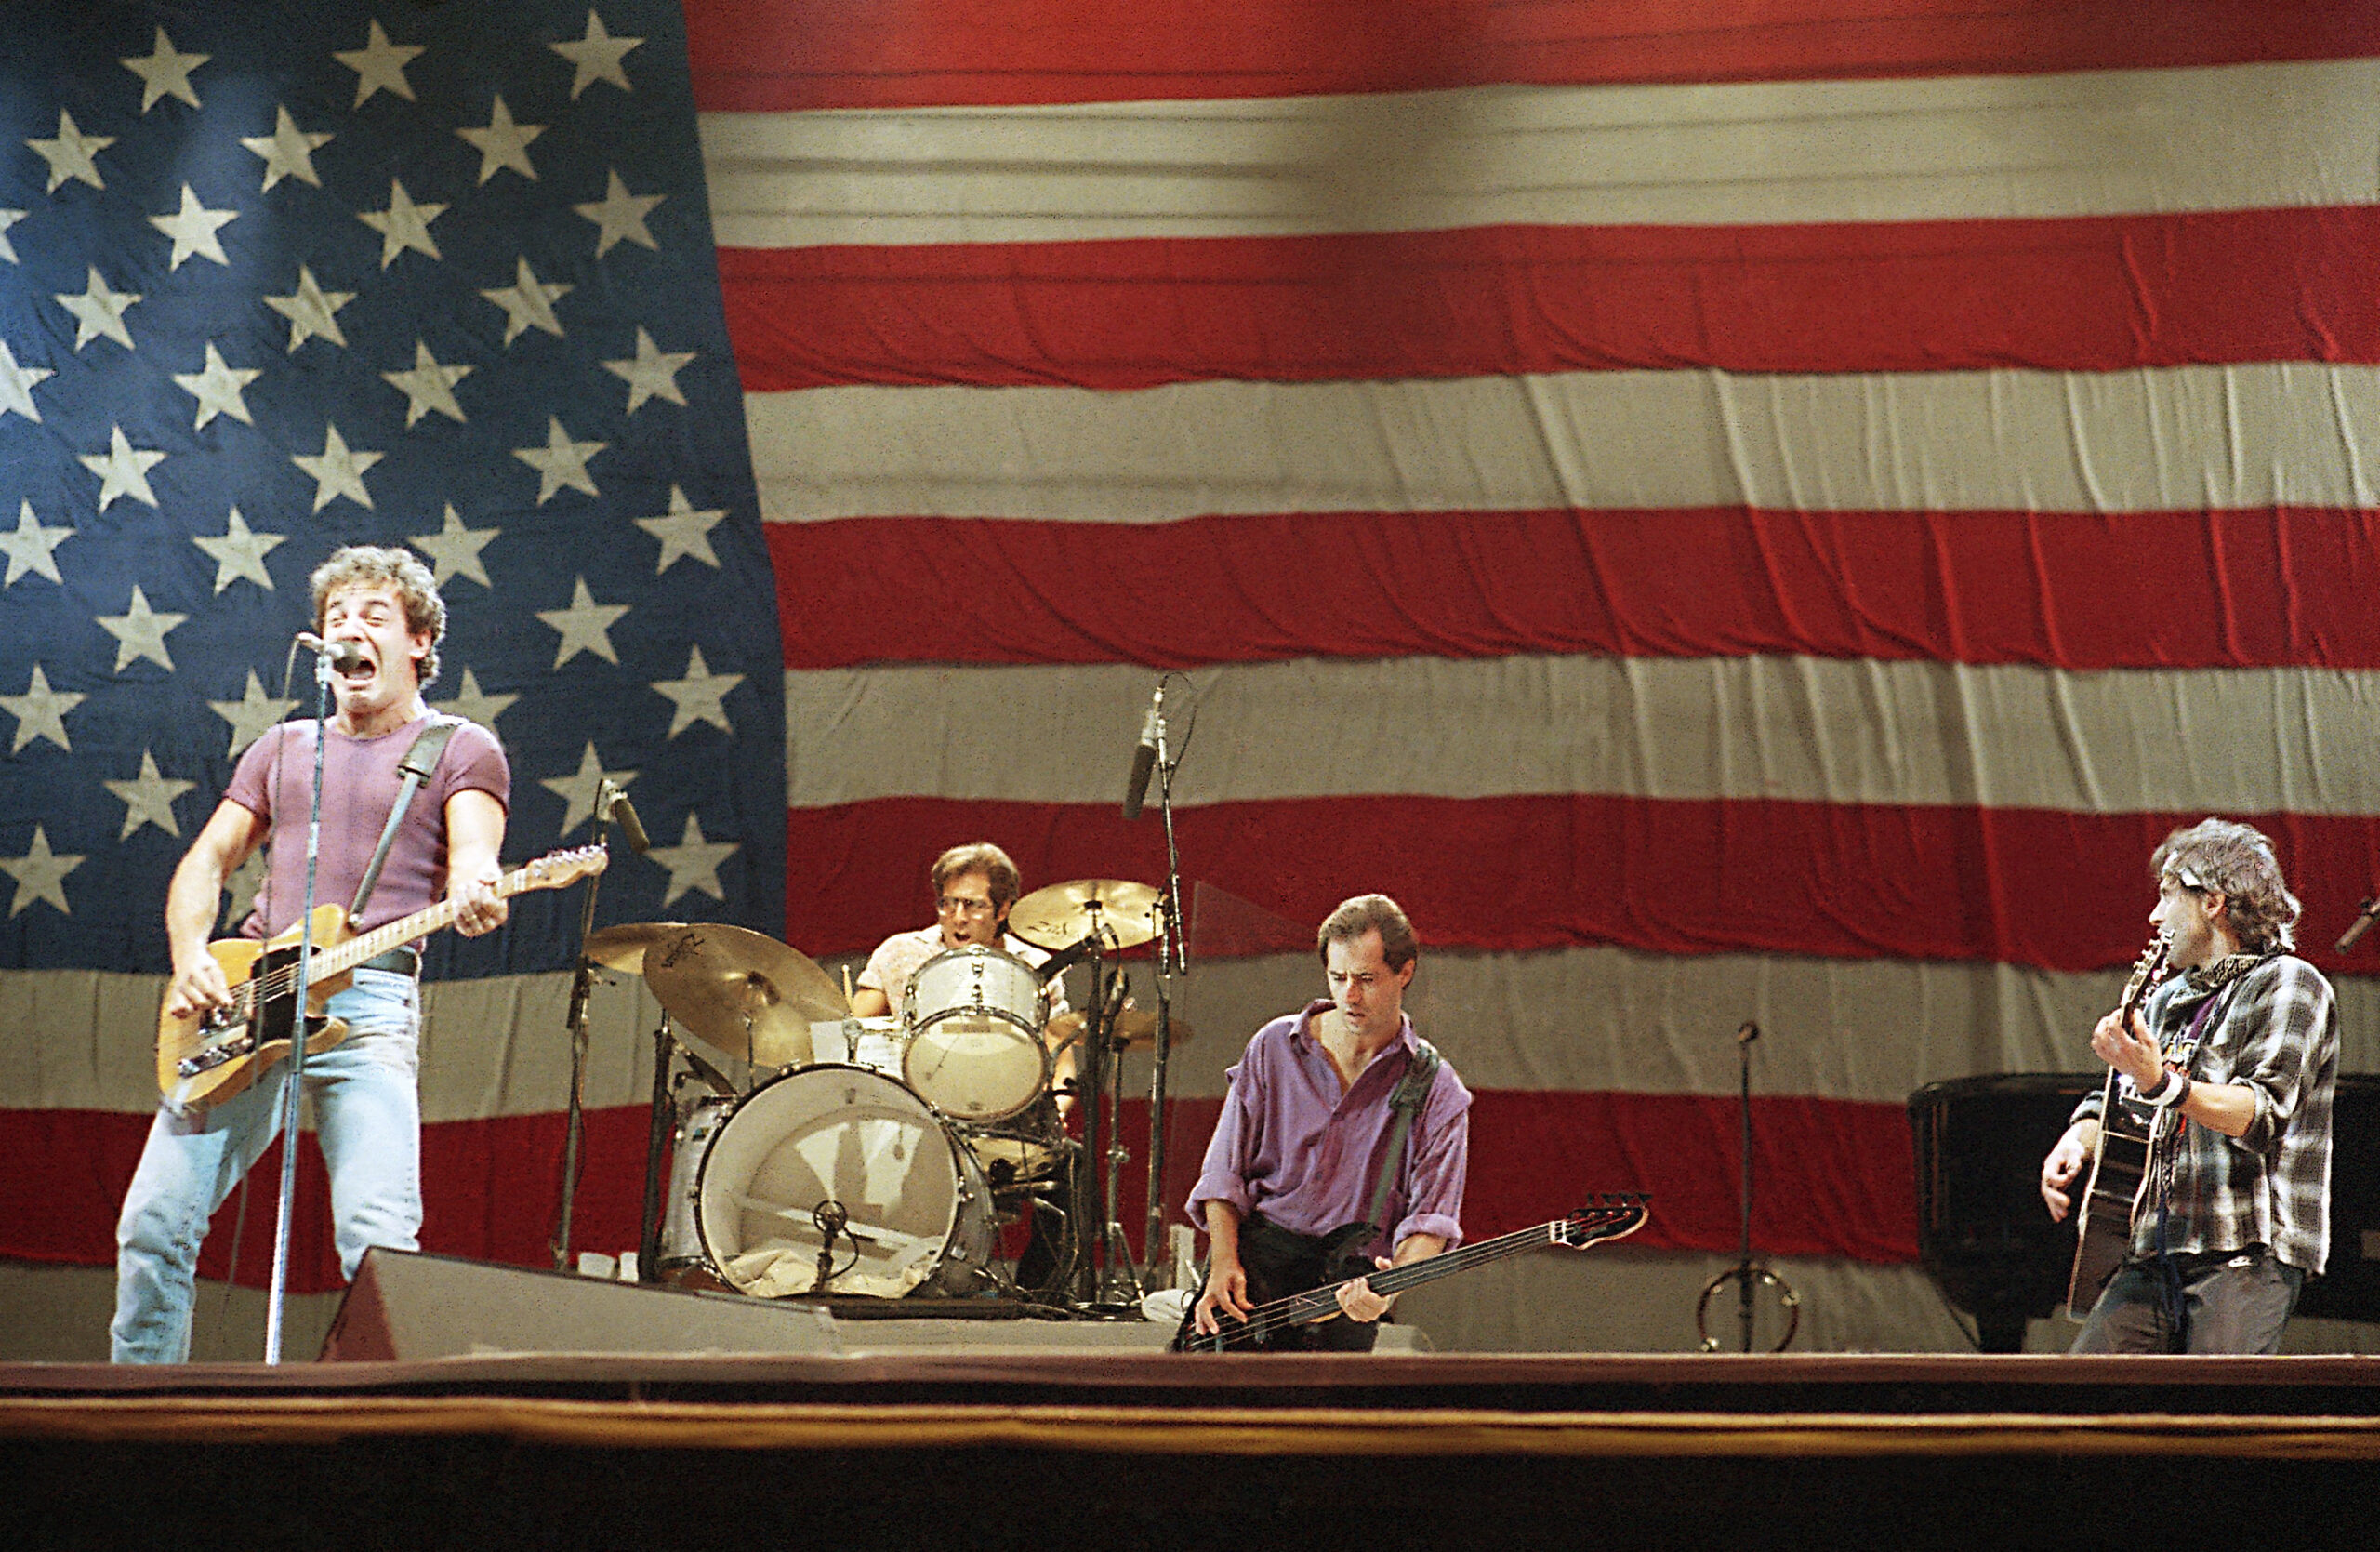 Bruce Springsteen and the E. Street Band on stage in front of an American flag